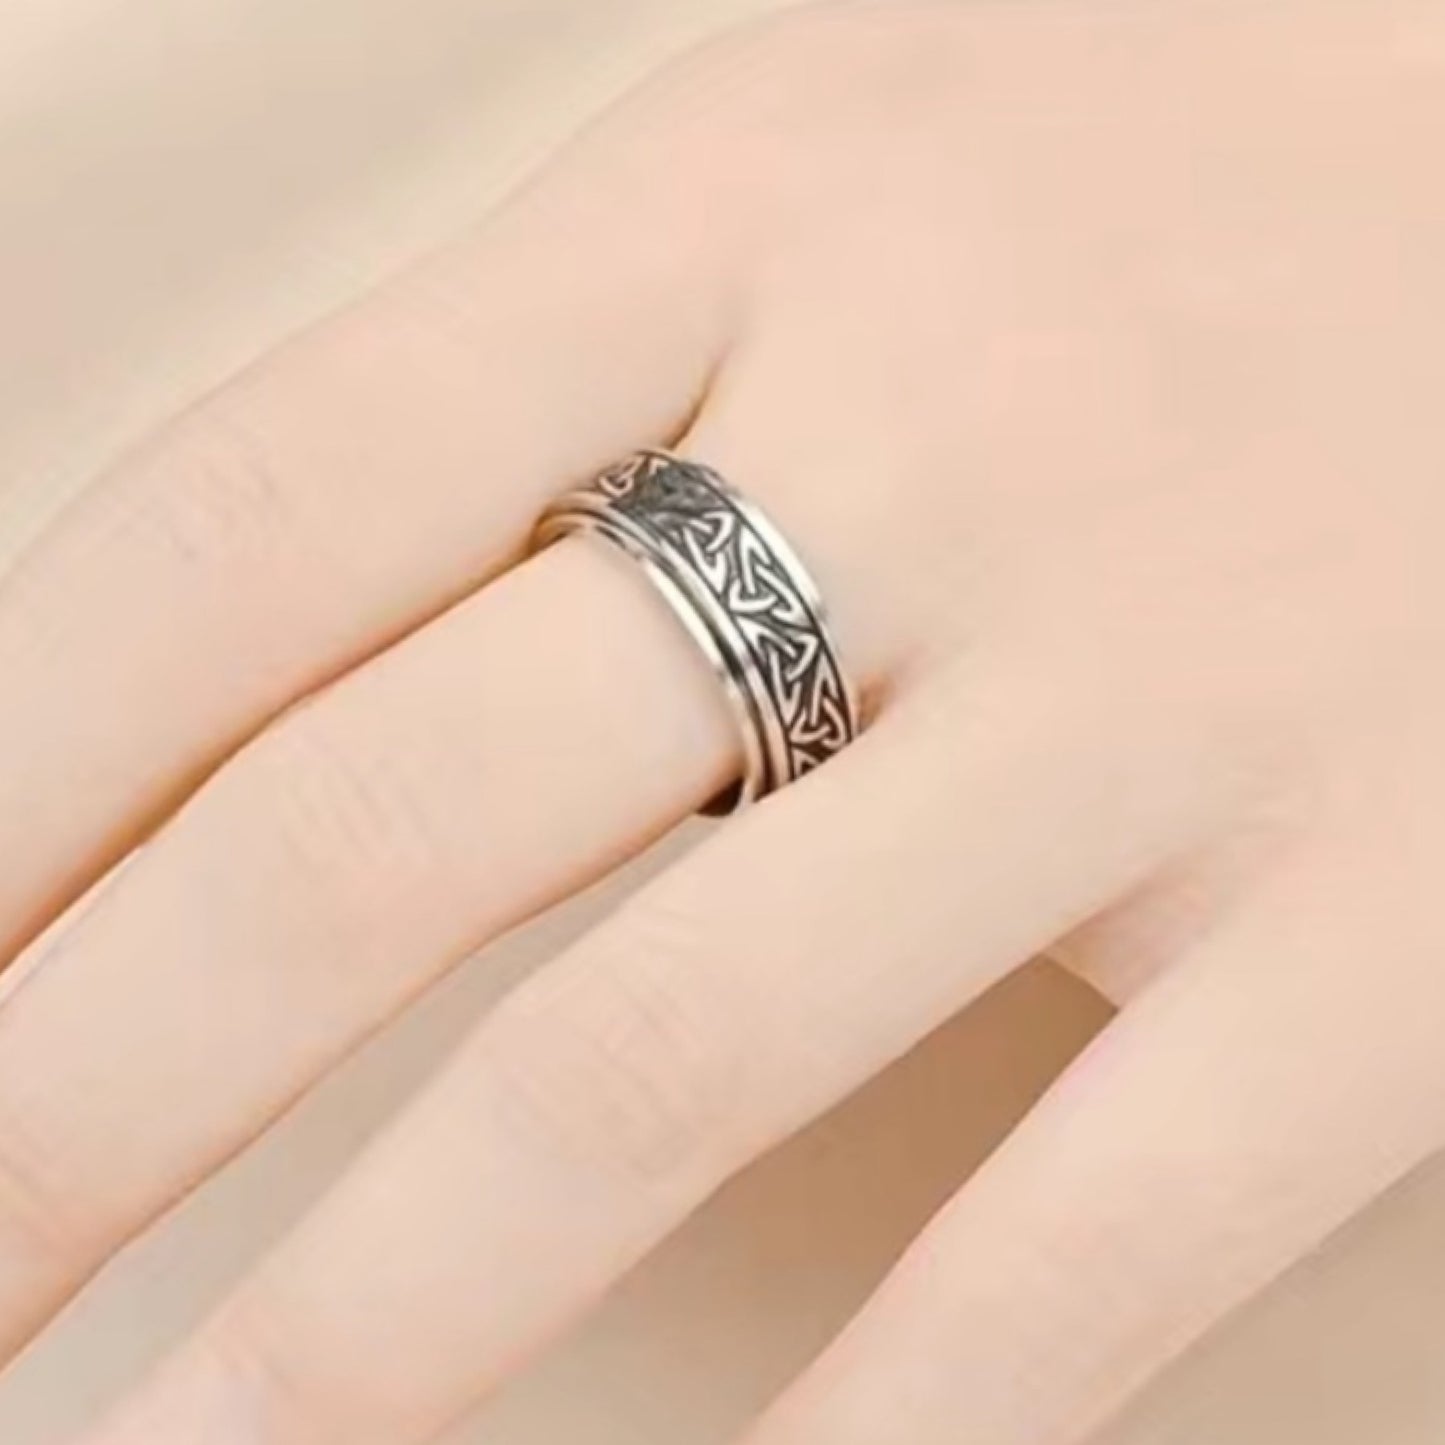 Silver Celtic Knot Anxiety Fidget Spinner Ring